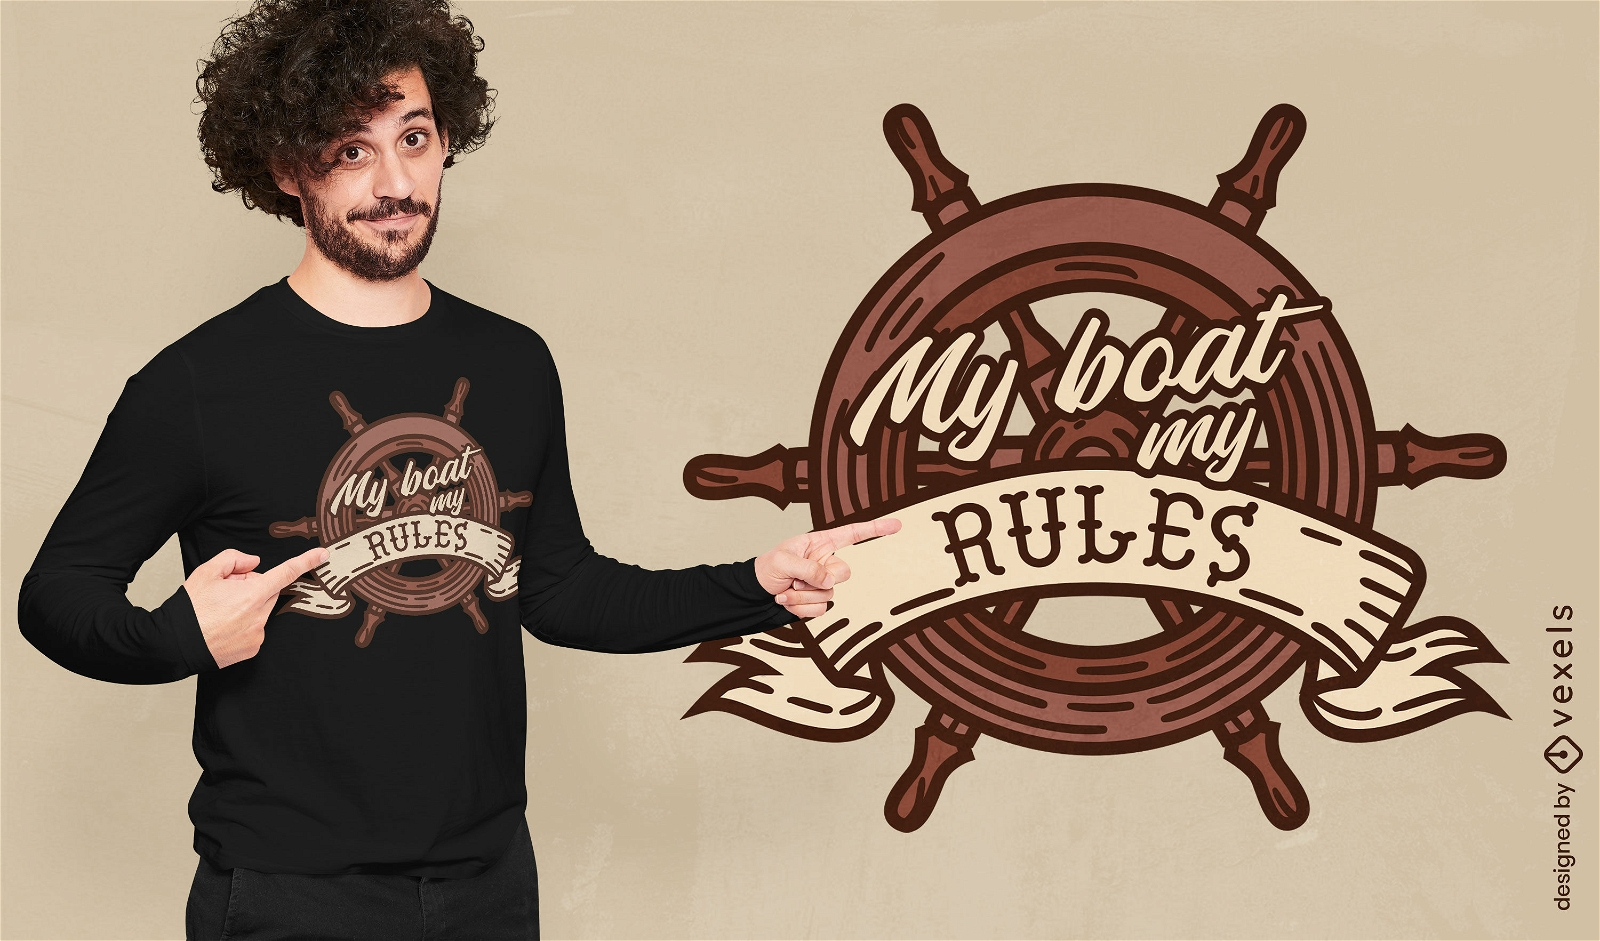 My boat my rules quote t-shirt design